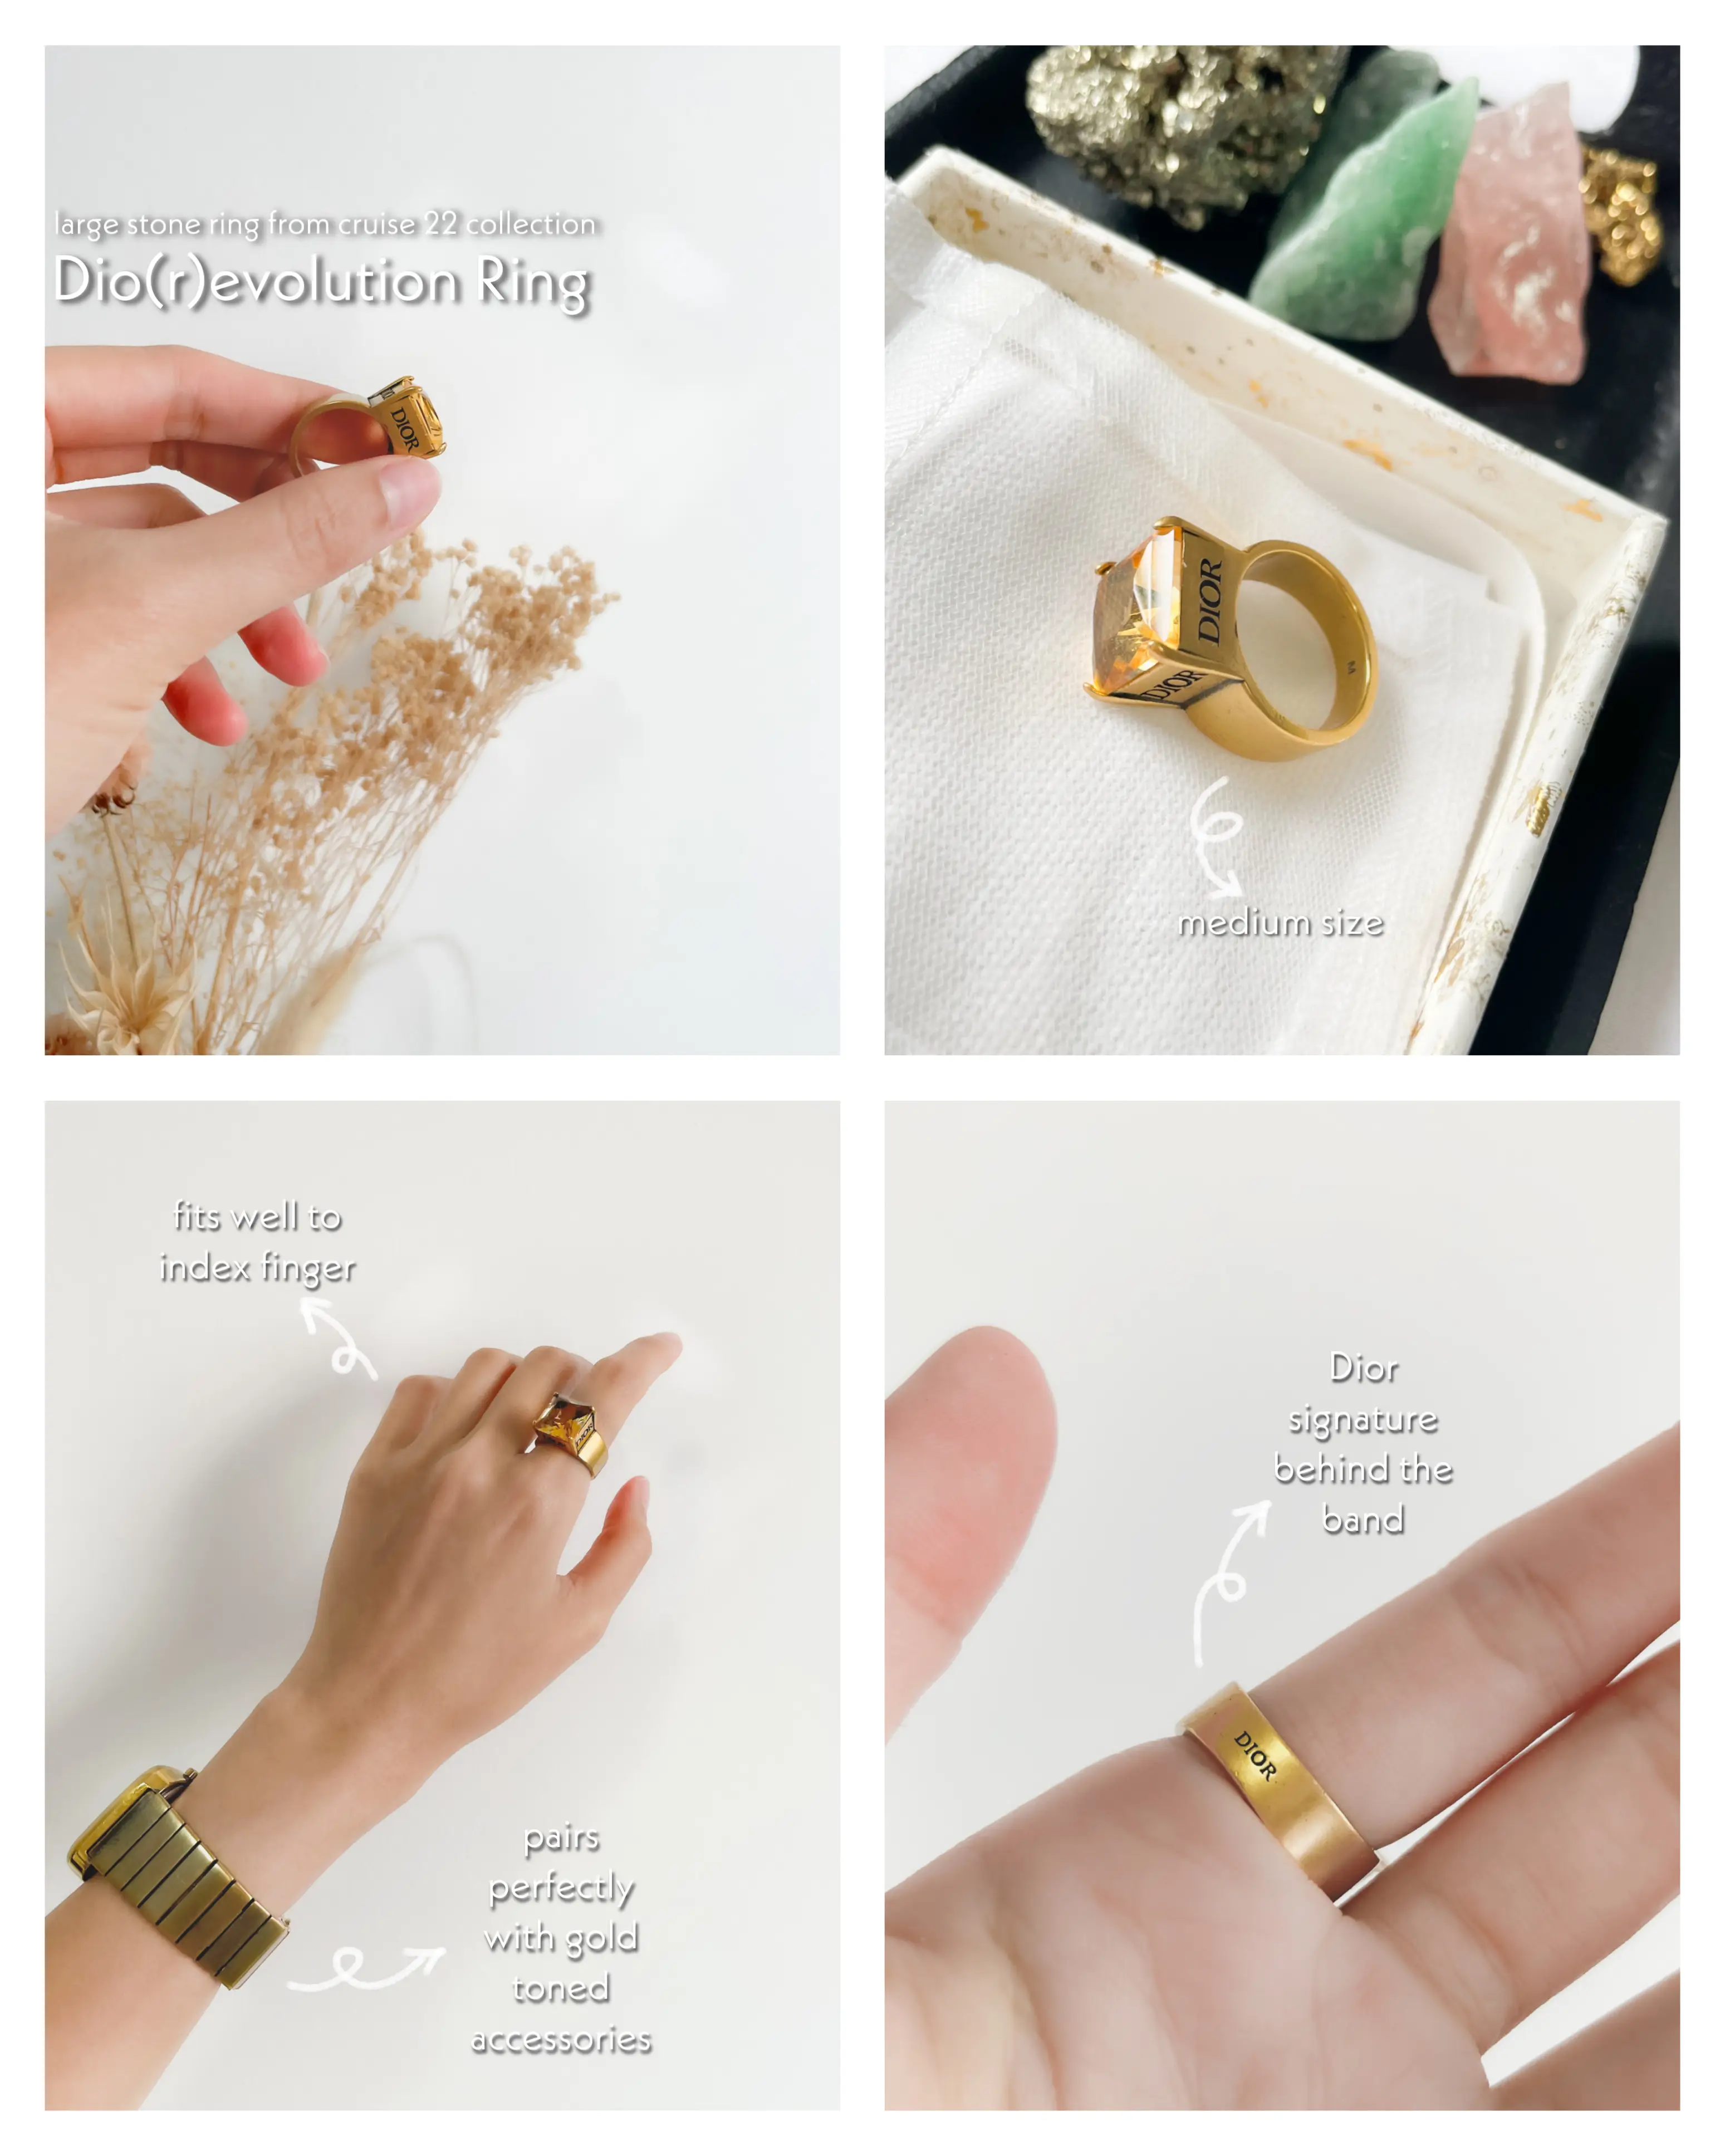 Size DOES matter - not the standard Dior ring | Gallery posted by